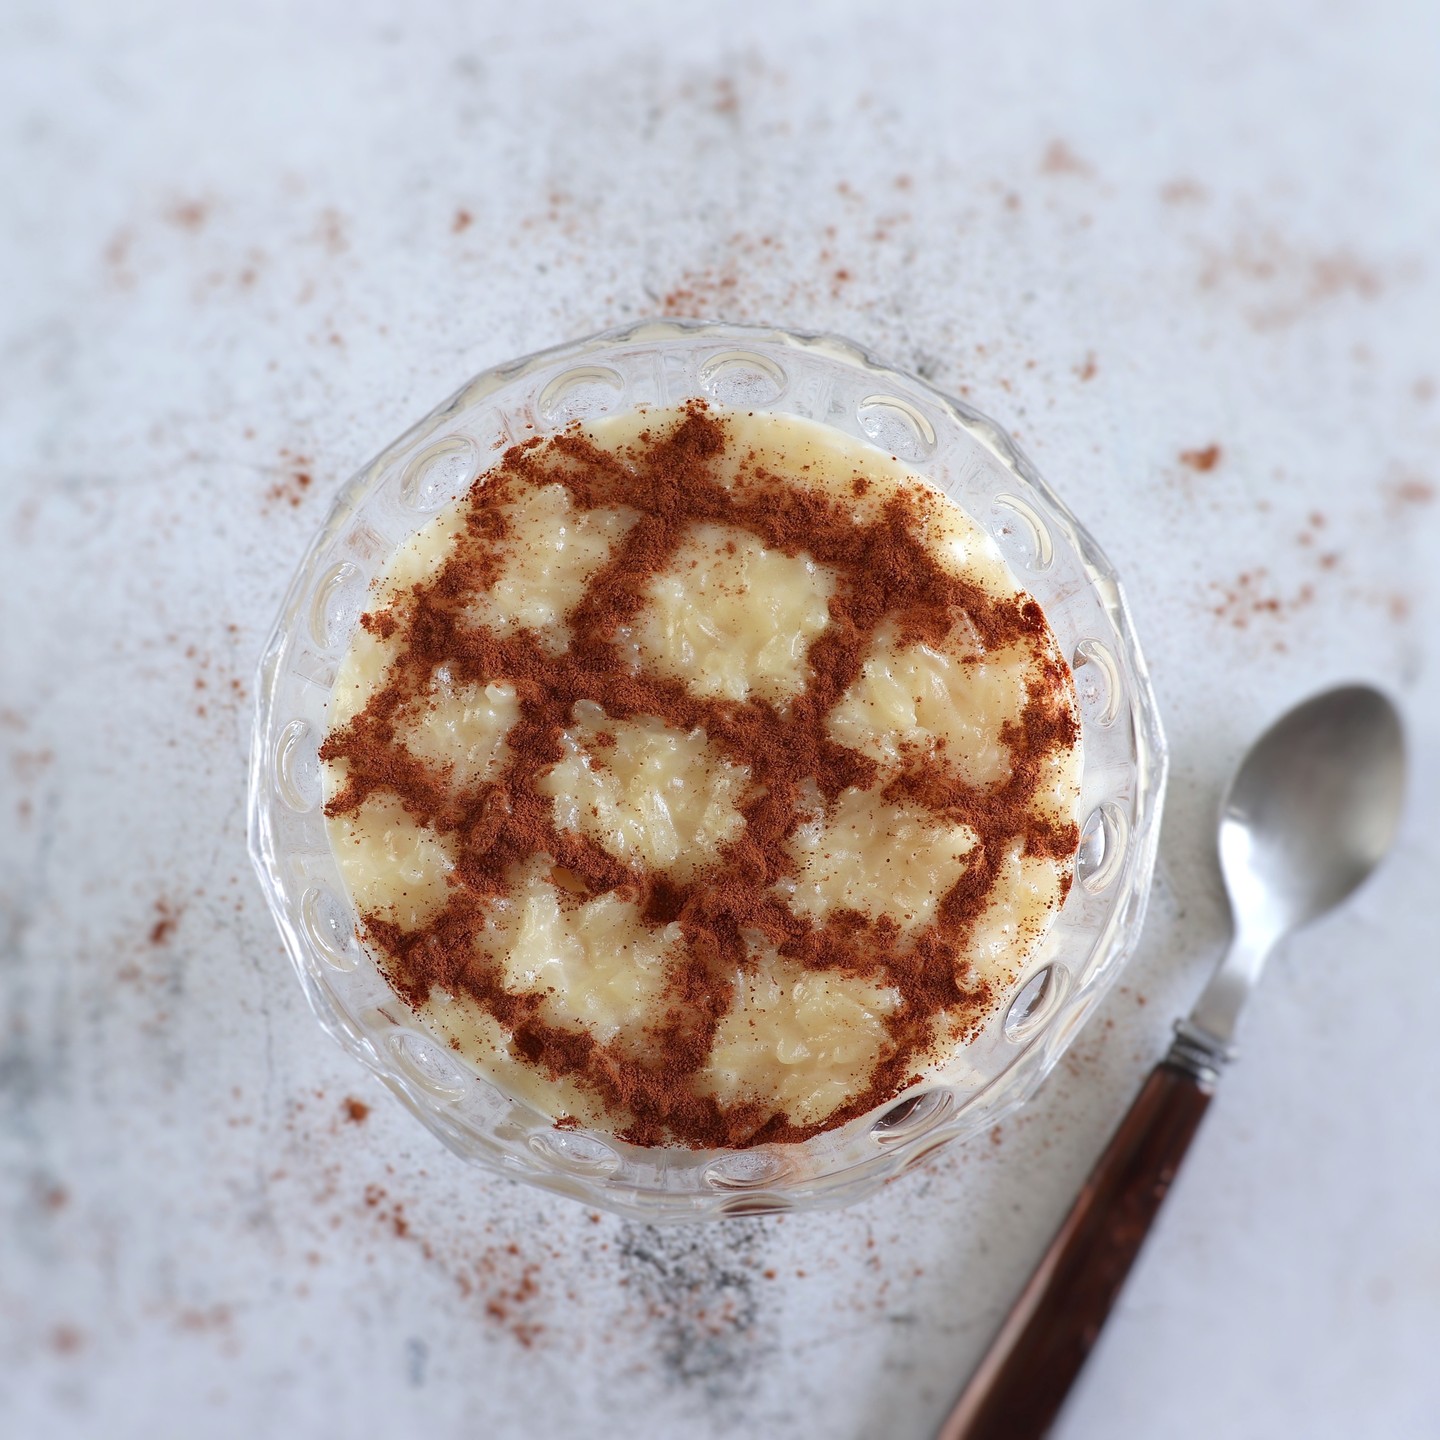 Rice pudding with sweetened condensed milk | Food From Portugal

Everyone will like this creamy, light and very tasty sweet. After the rice cooked, flavor with cinnamon powder. In addition to give an extra flavor to the rice pudding, it also gives an original presentation. Bon appetit!!!

Recipe: https://www.foodfromportugal.com/recipes/rice-pudding-condensed-milk/

#food #easy #easyrecipes #instafood #recipe #recipes #homemade #condensedmilk #rice #ricepudding #ricepuddingrecipe #dessert